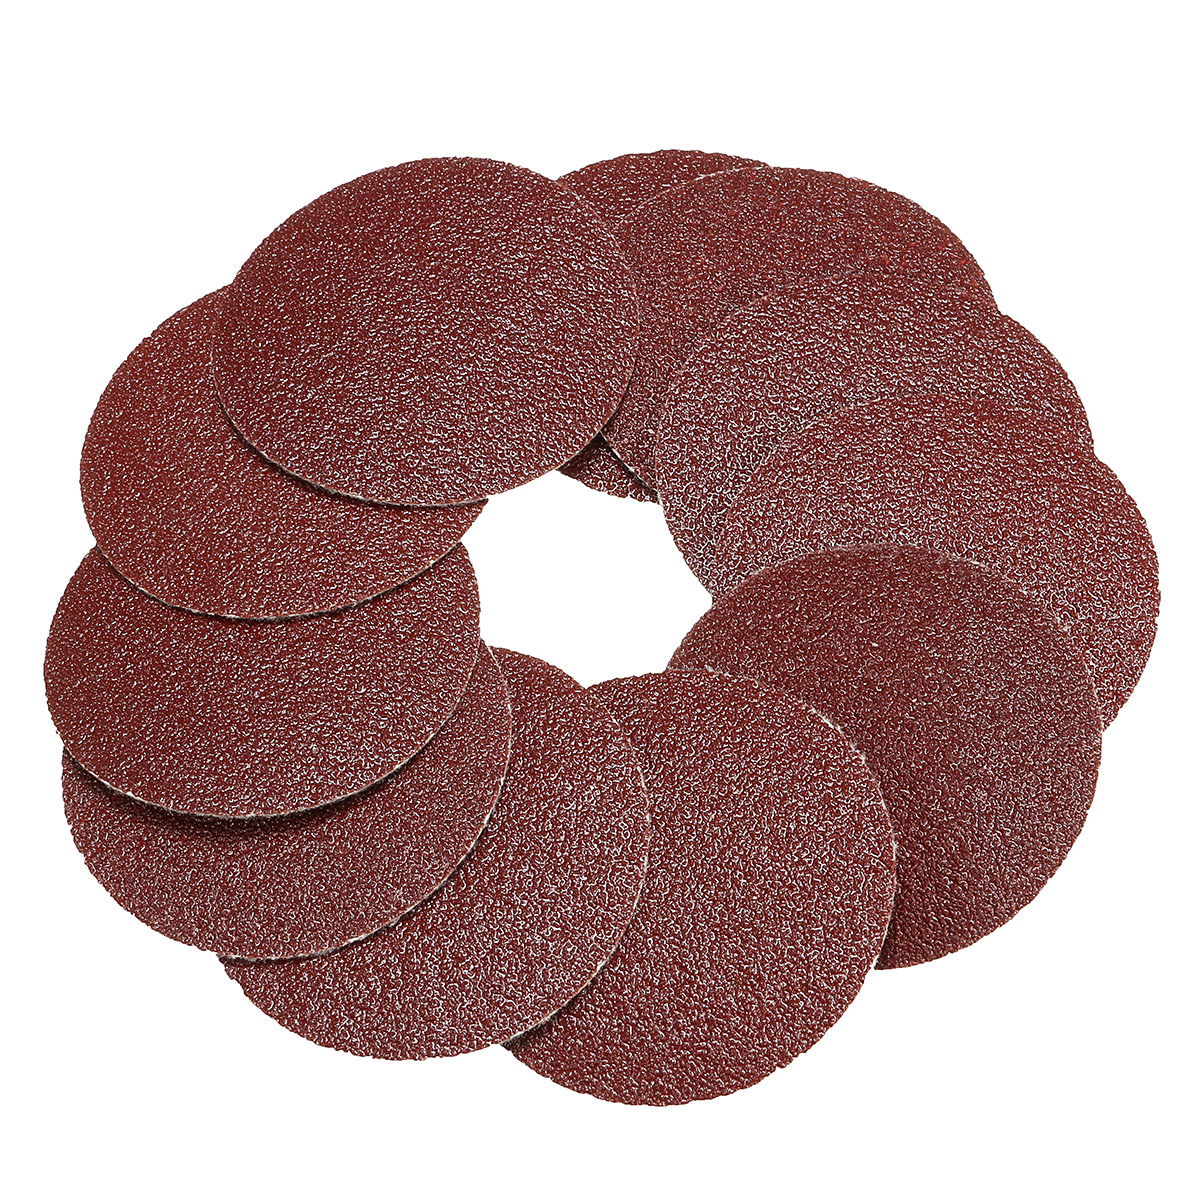 60pcs-3-Inch-6080120-Grit-Sandpaper-with-75mm-Hand-Polishing-Pad-for-Polishing-Abrasive-Tools-1680185-2